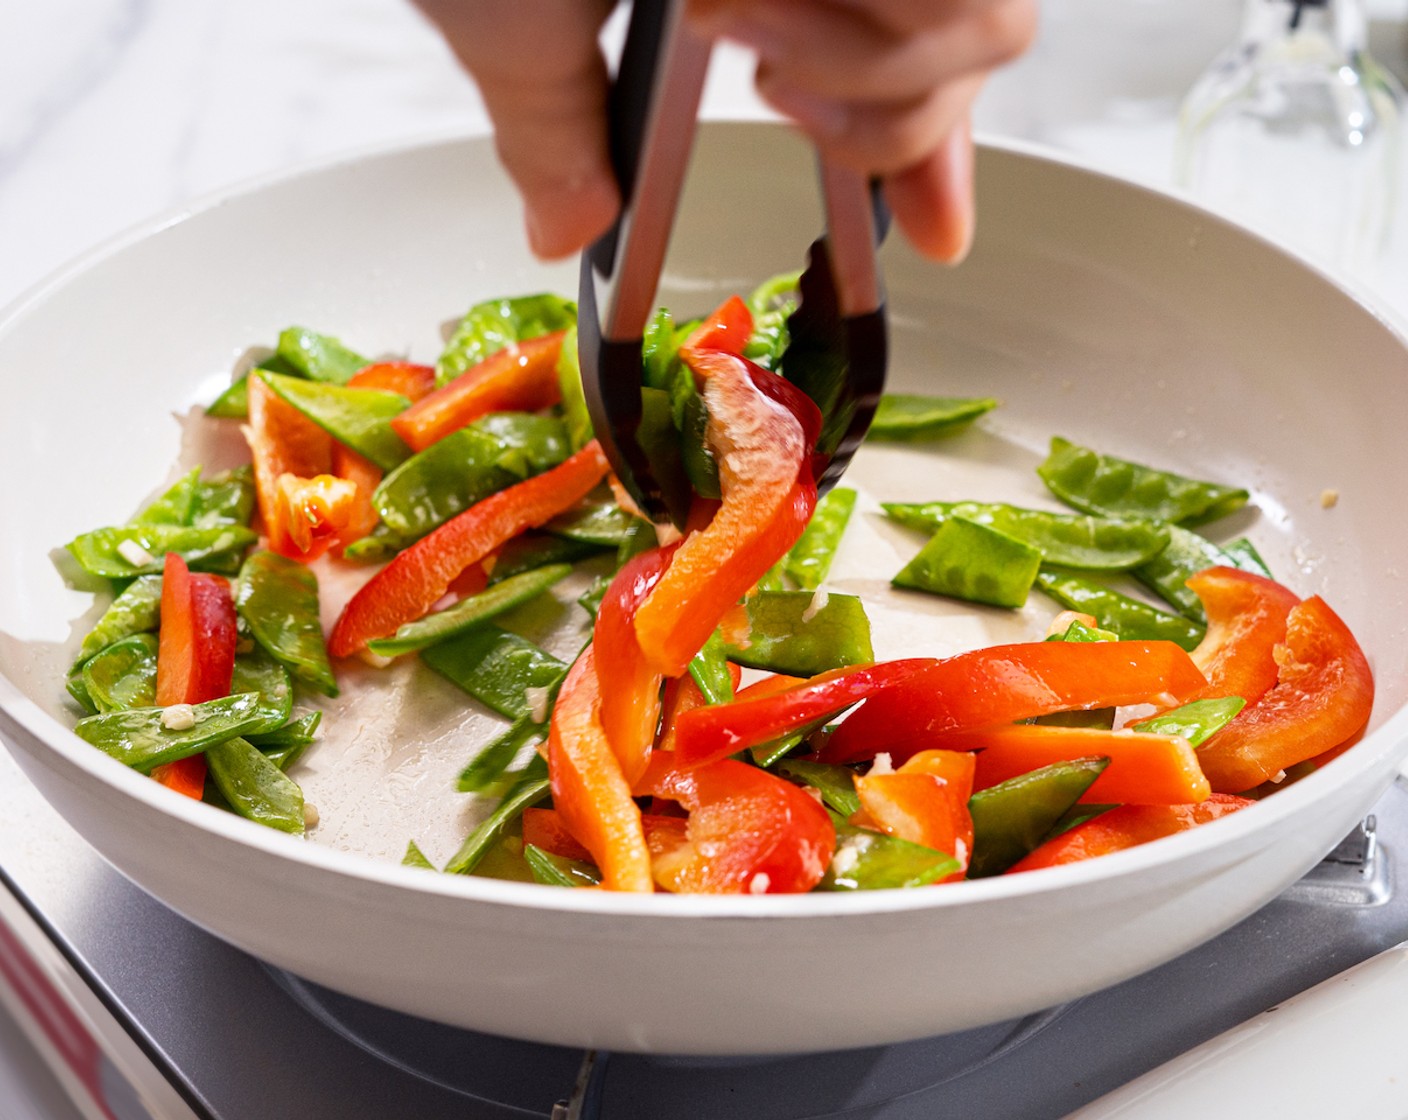 step 2 Heat the frying pan with Vegetable Oil (1 Tbsp). Once hot, add another Garlic (2 cloves), Snow Peas (3/4 cup), and Red Bell Pepper (1). Stir fry for 2-3 minutes. Remove from the pan, and set aside.